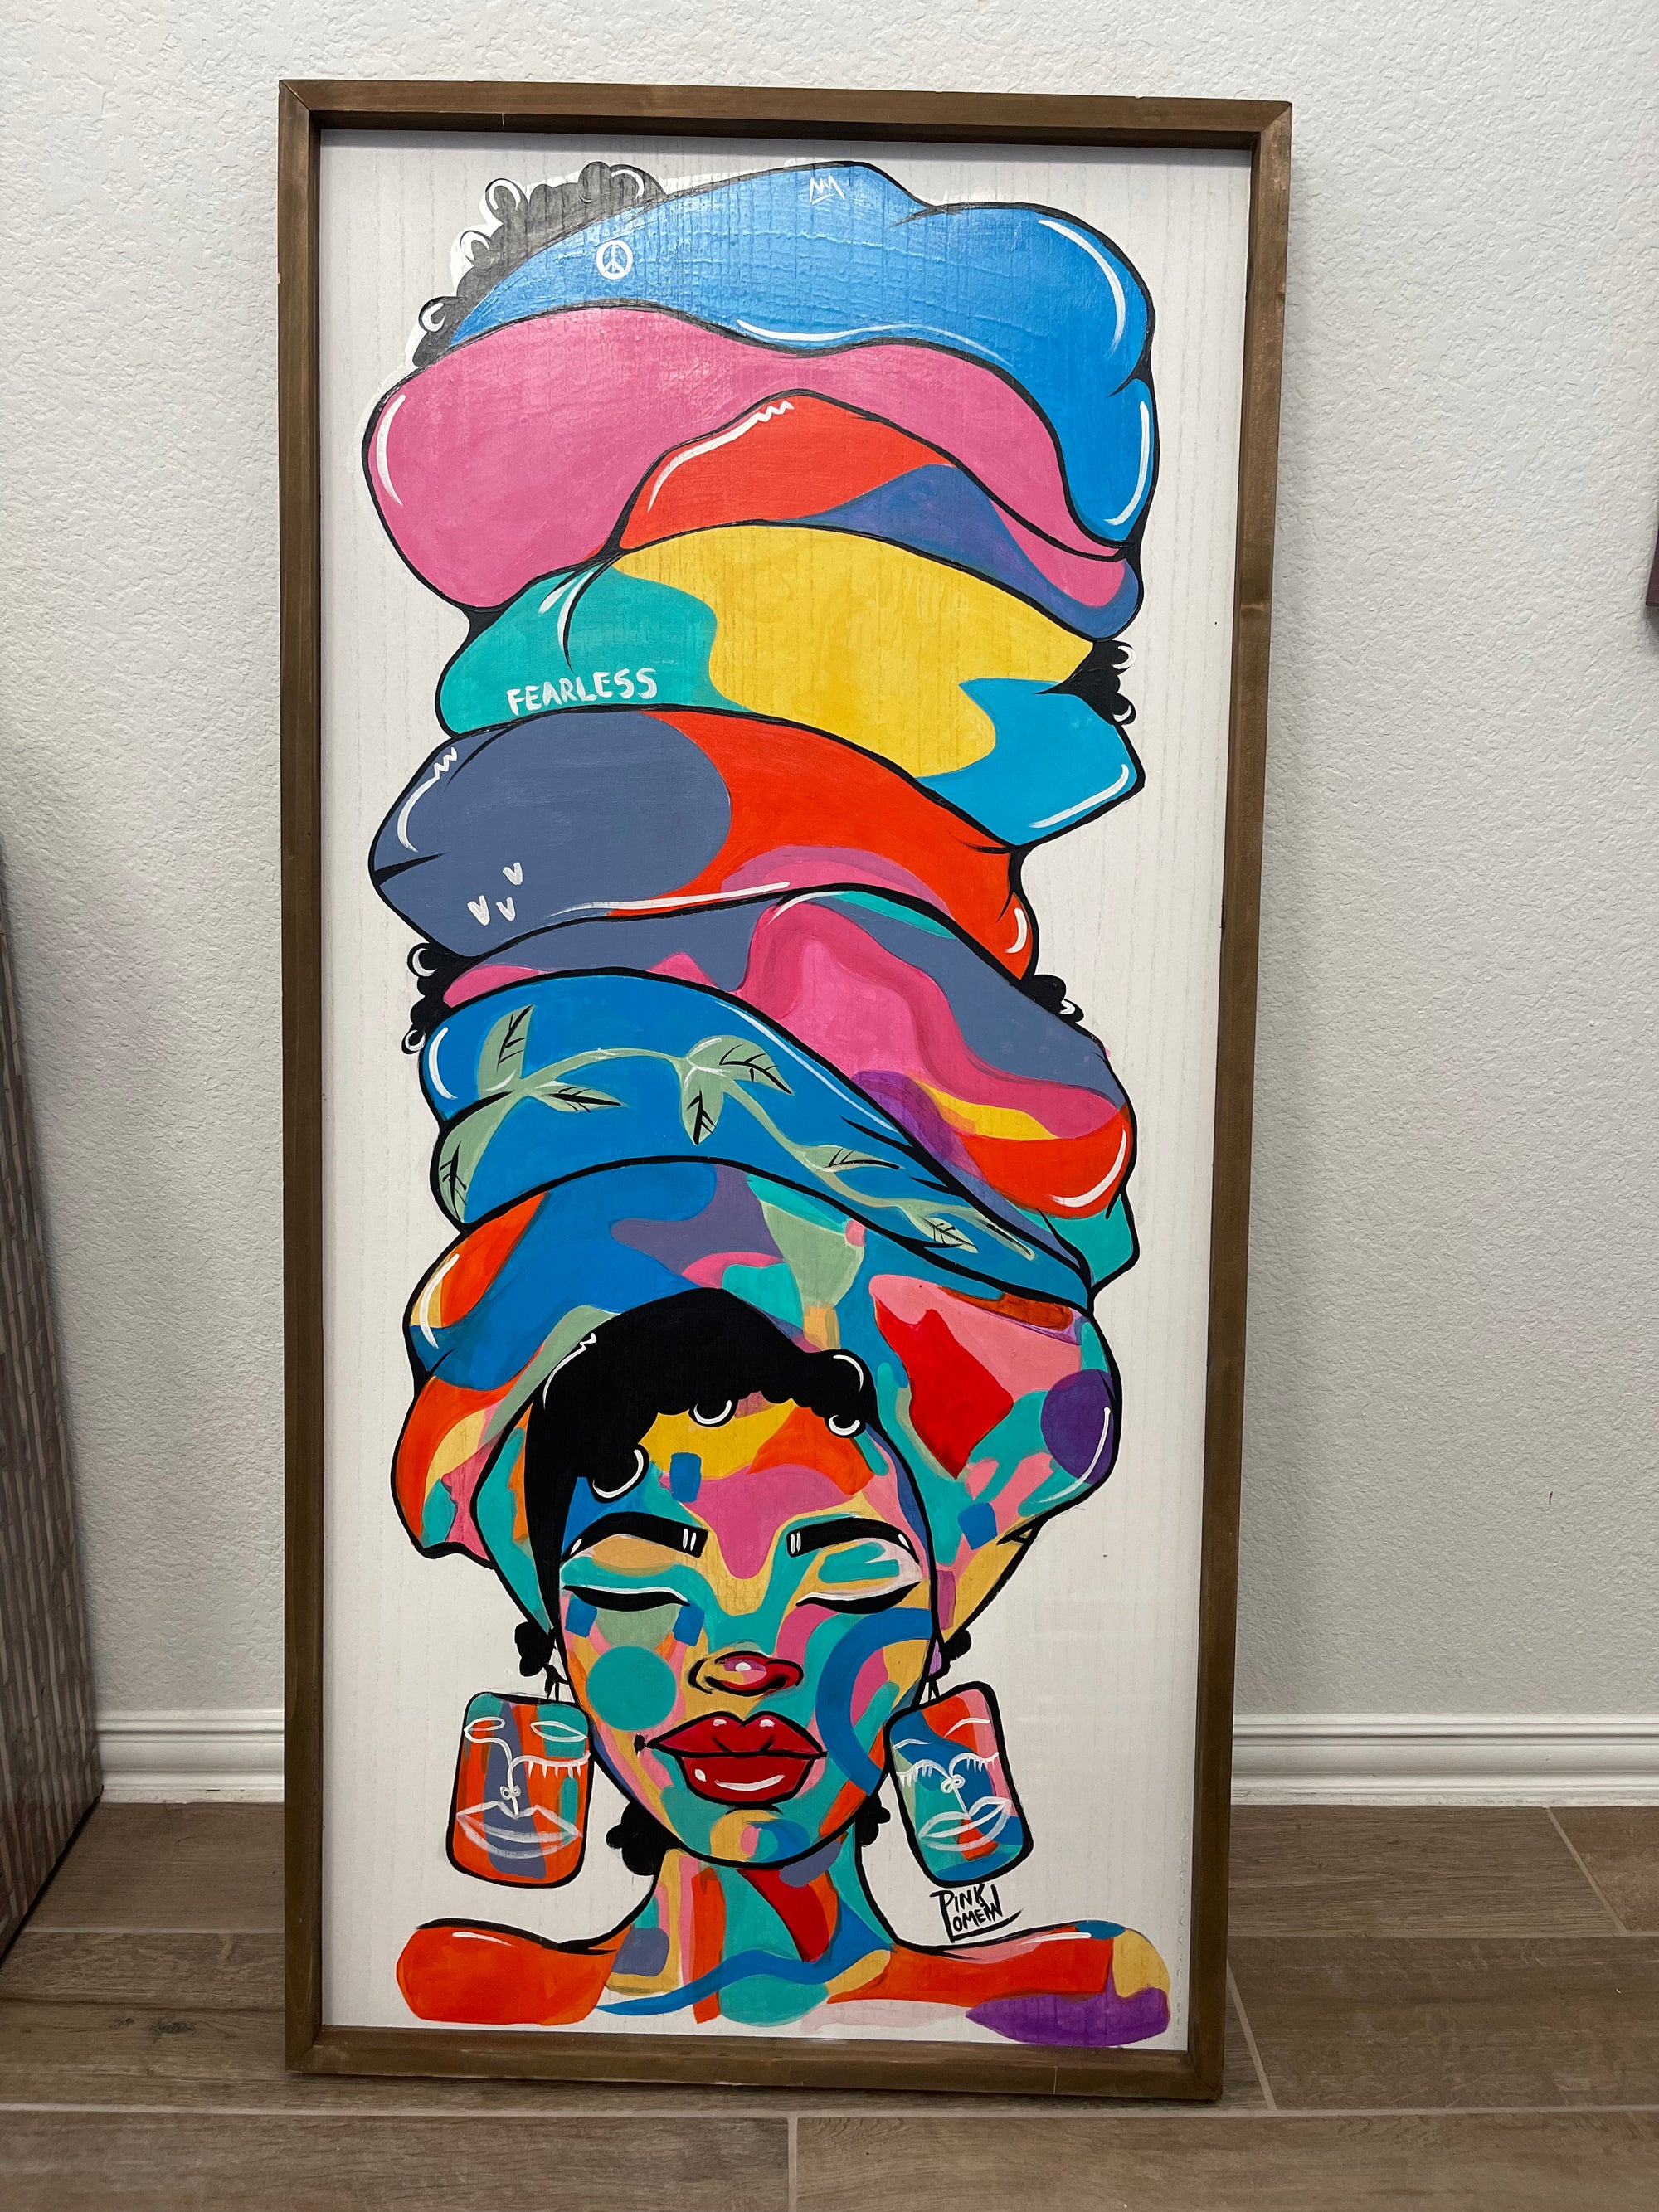 Makings of a Queen 24x48 Original Painting